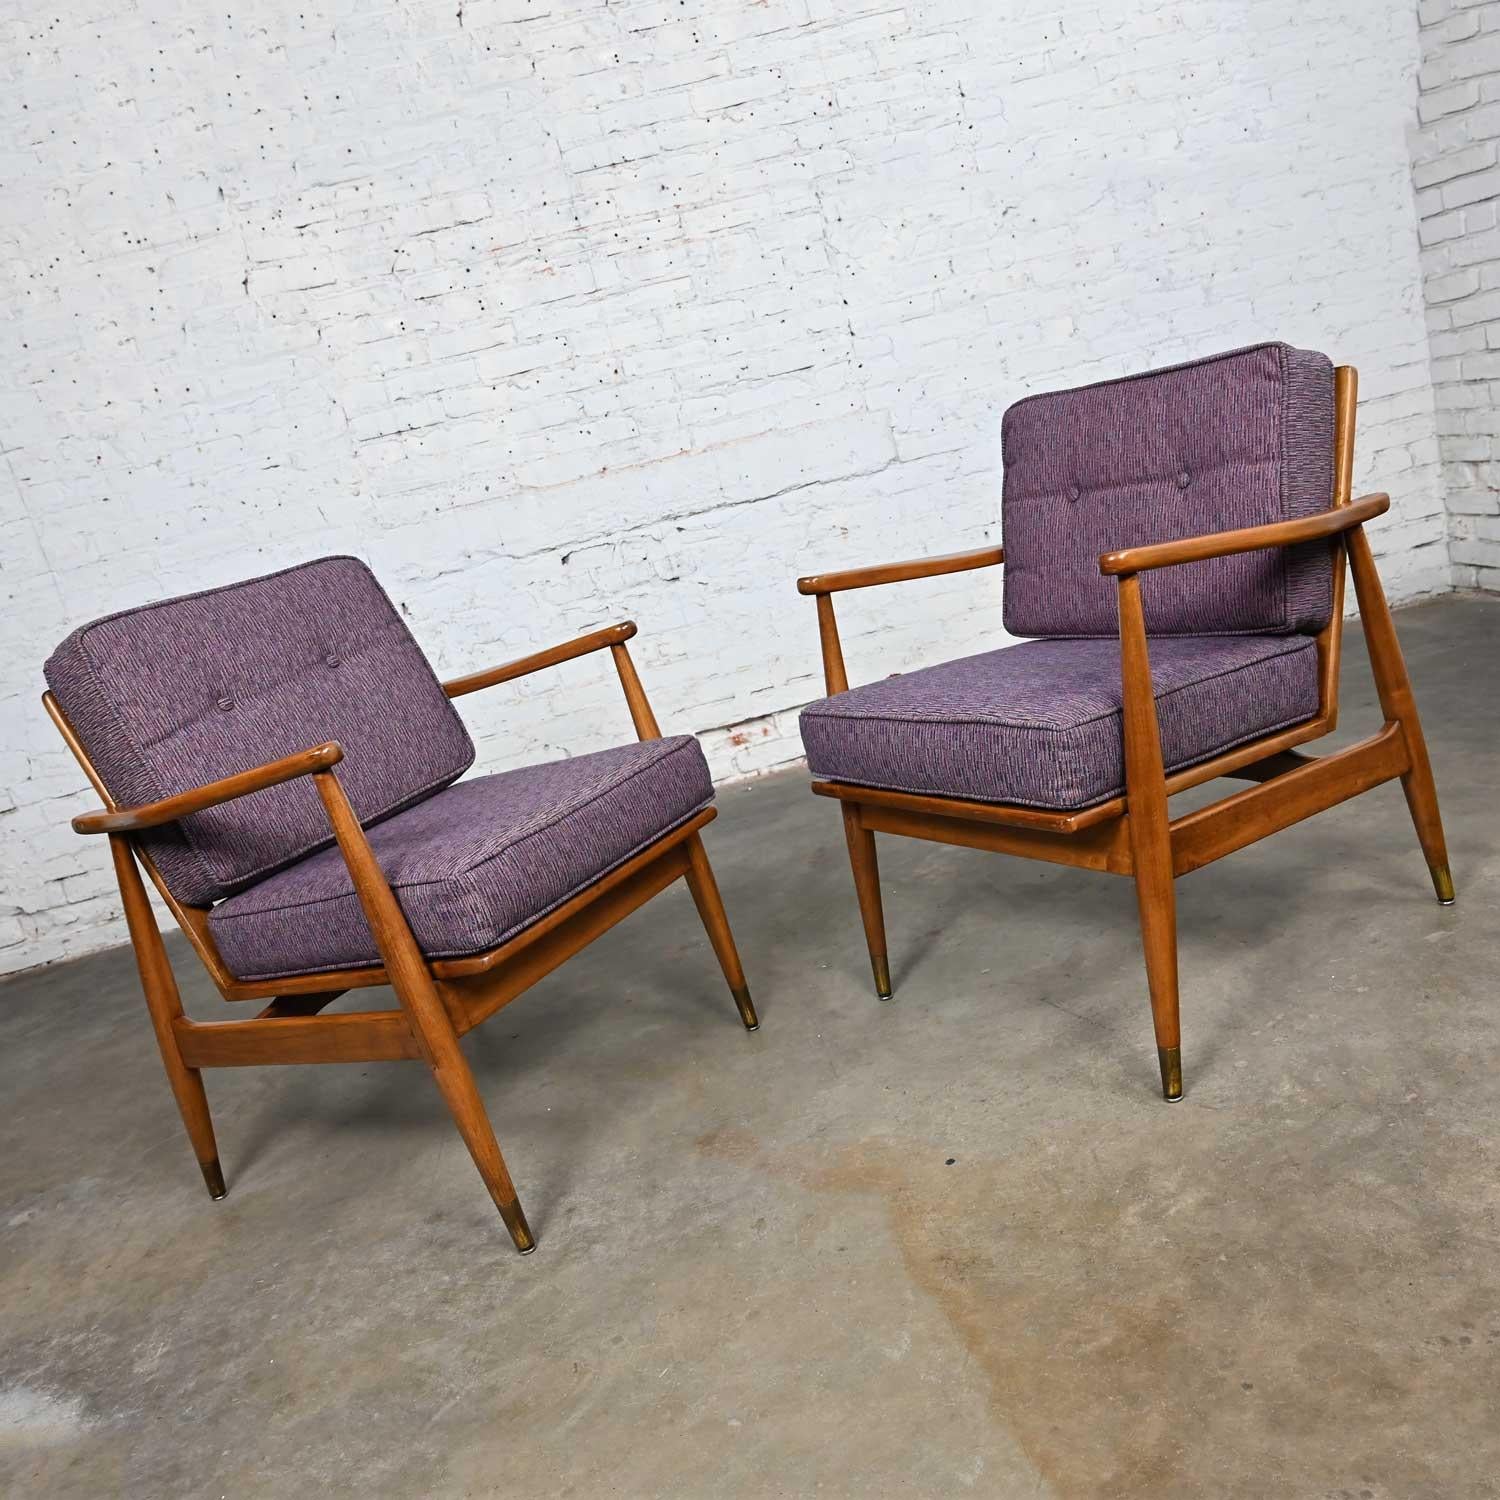 Lovely vintage MCM or Mid-Century Danish Modern armchairs or lounge chairs with tapered legs & brass sabots in the style of Folke Ohlsson for DUX. Beautiful condition, keeping in mind that these are vintage and not new so will have signs of use and